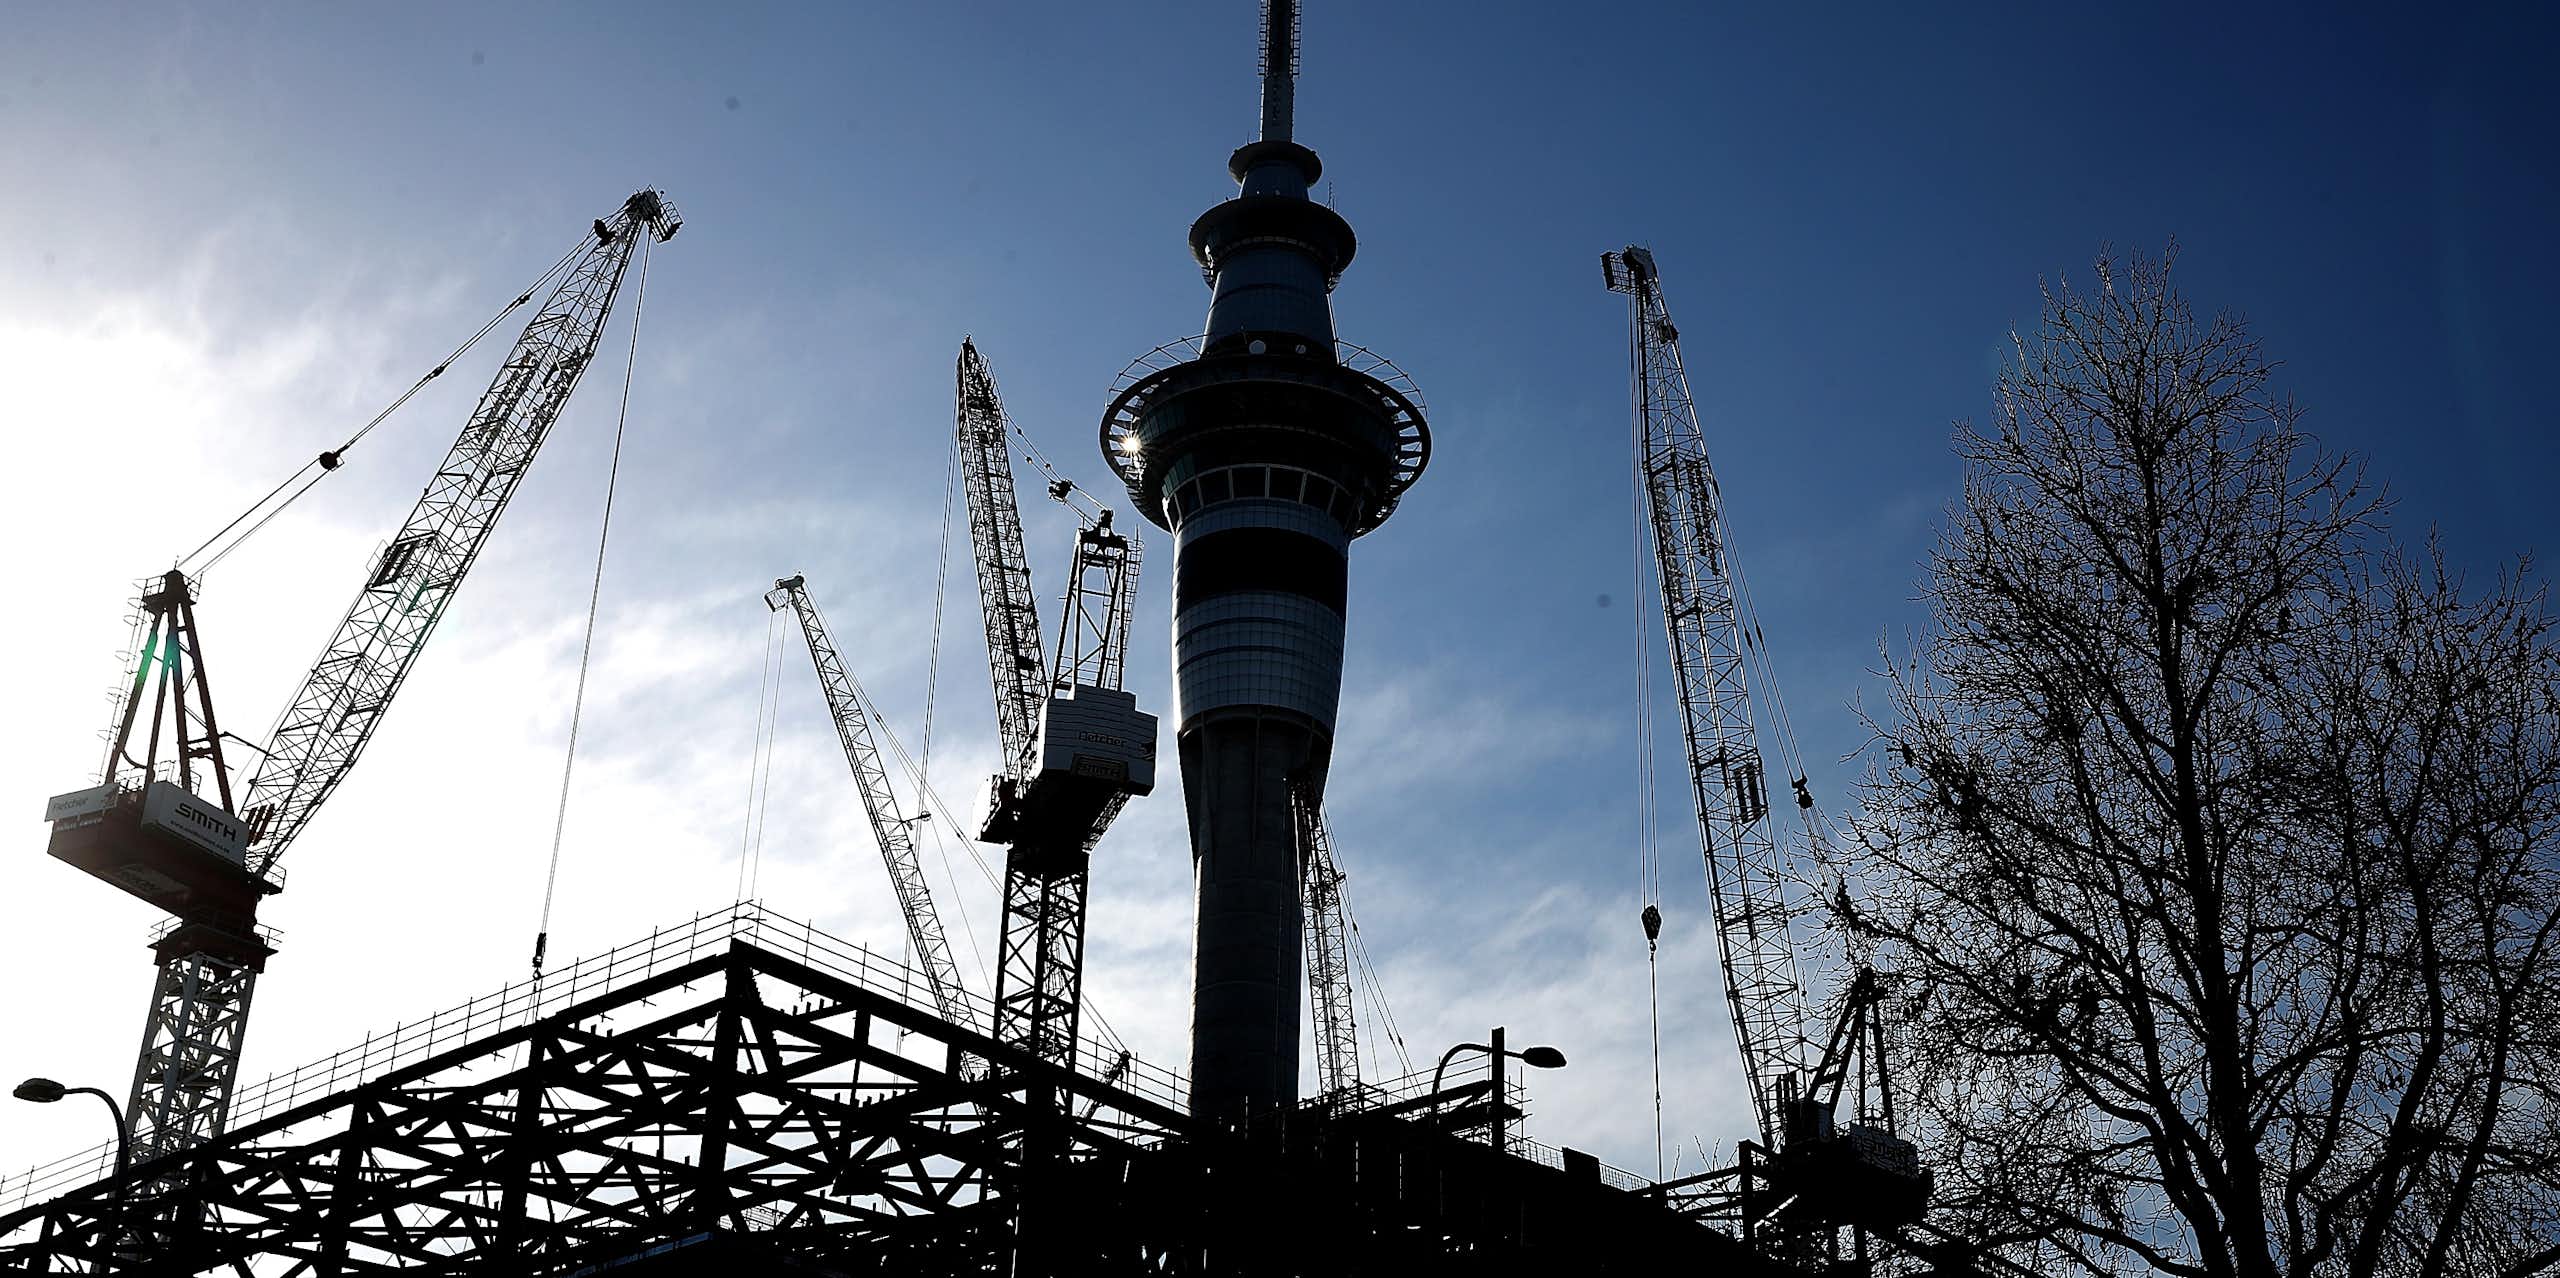 Auckland Sky Tower with construction cranes